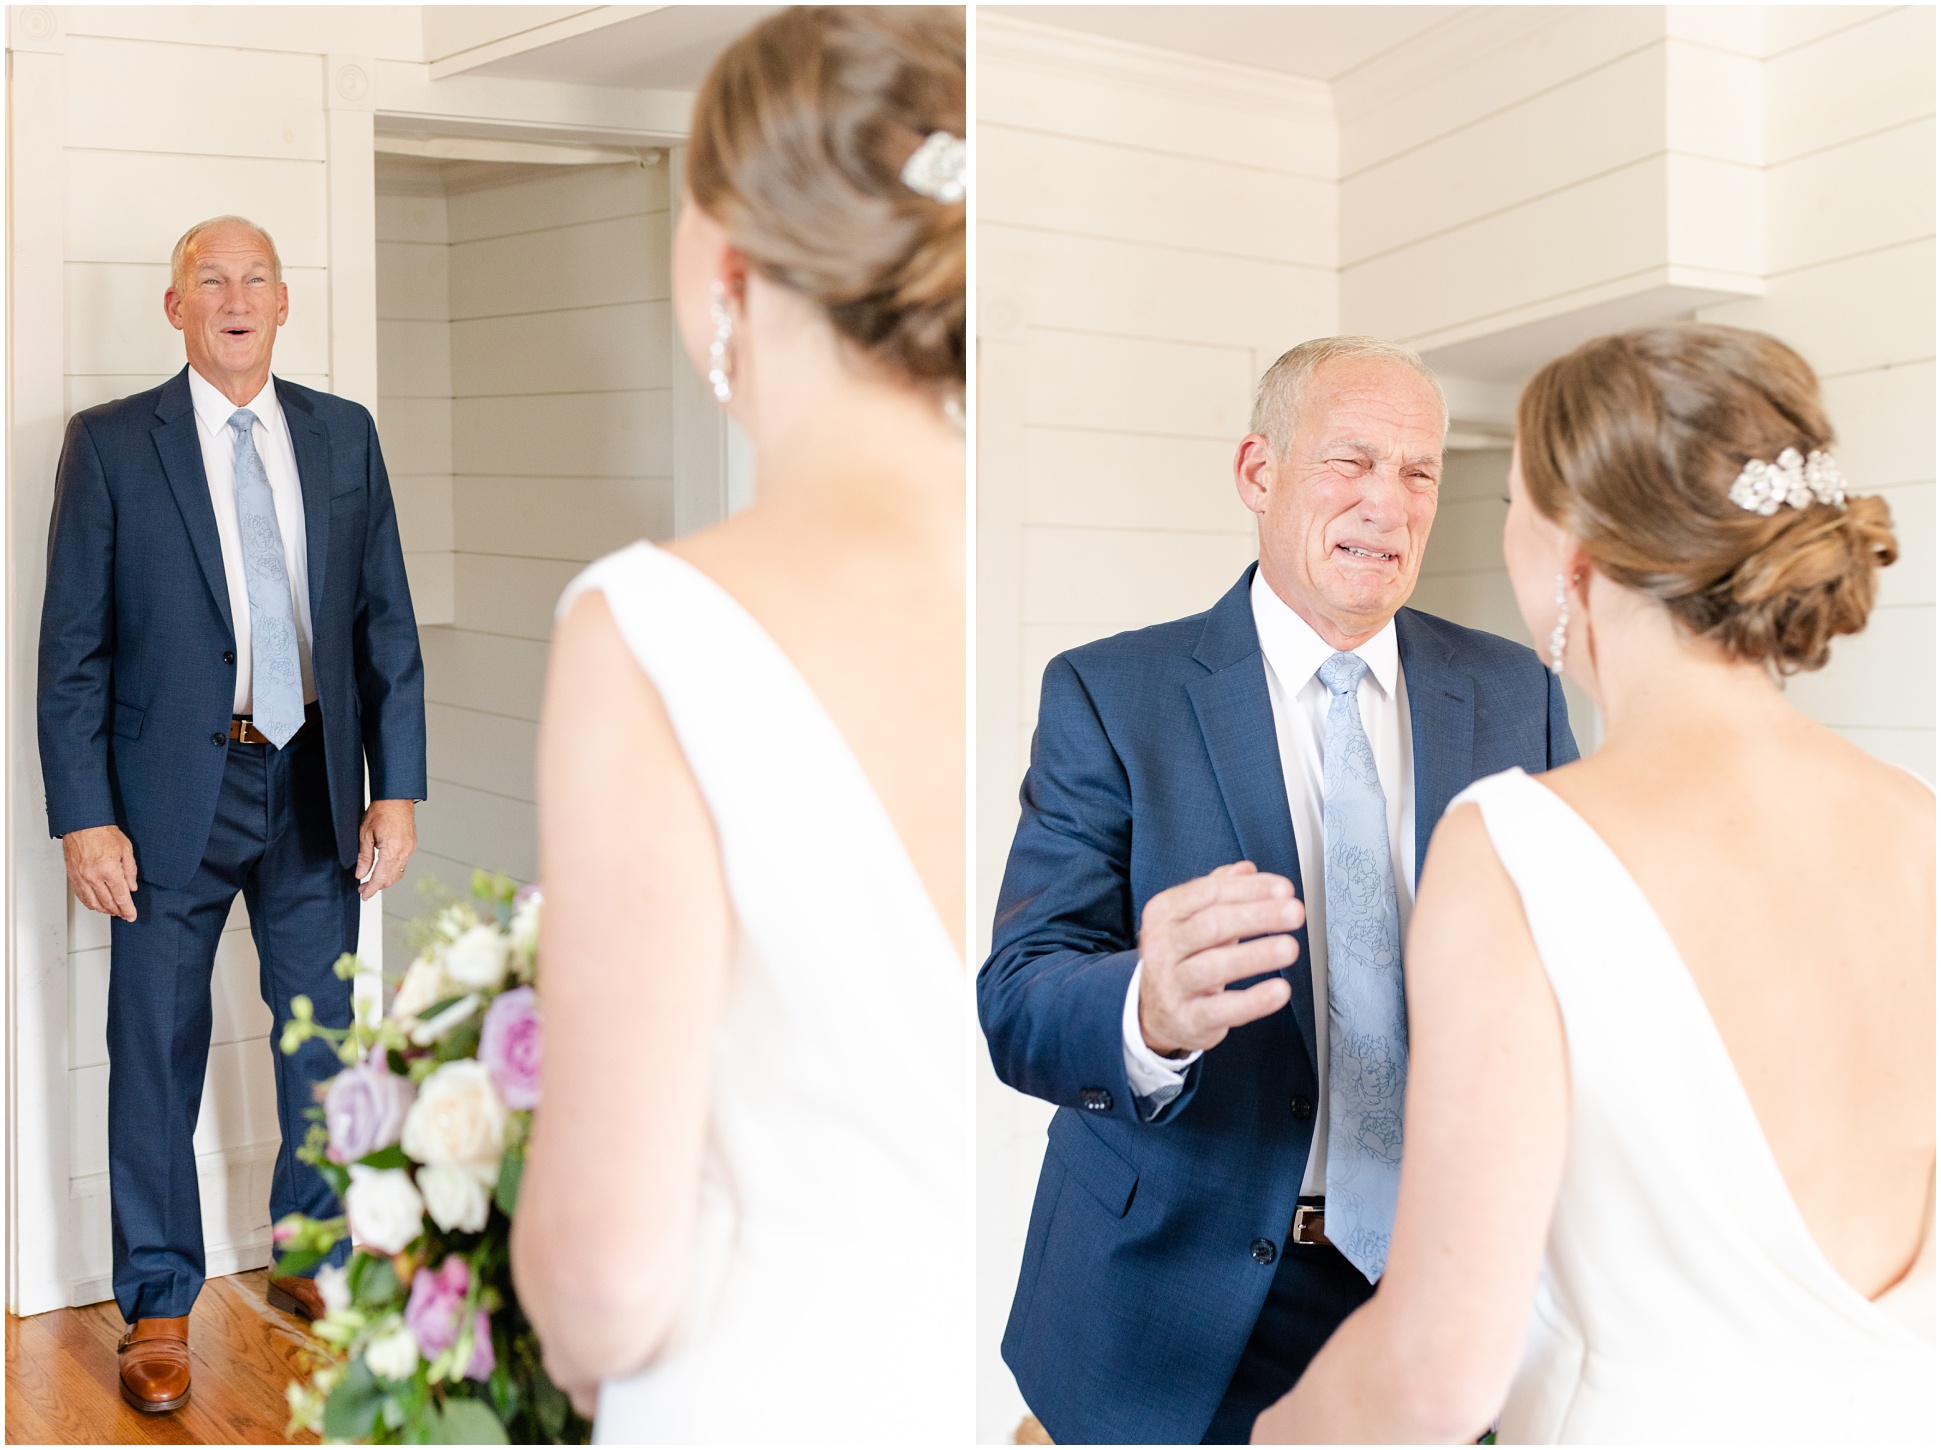 Two images of the father of the bride's reaction